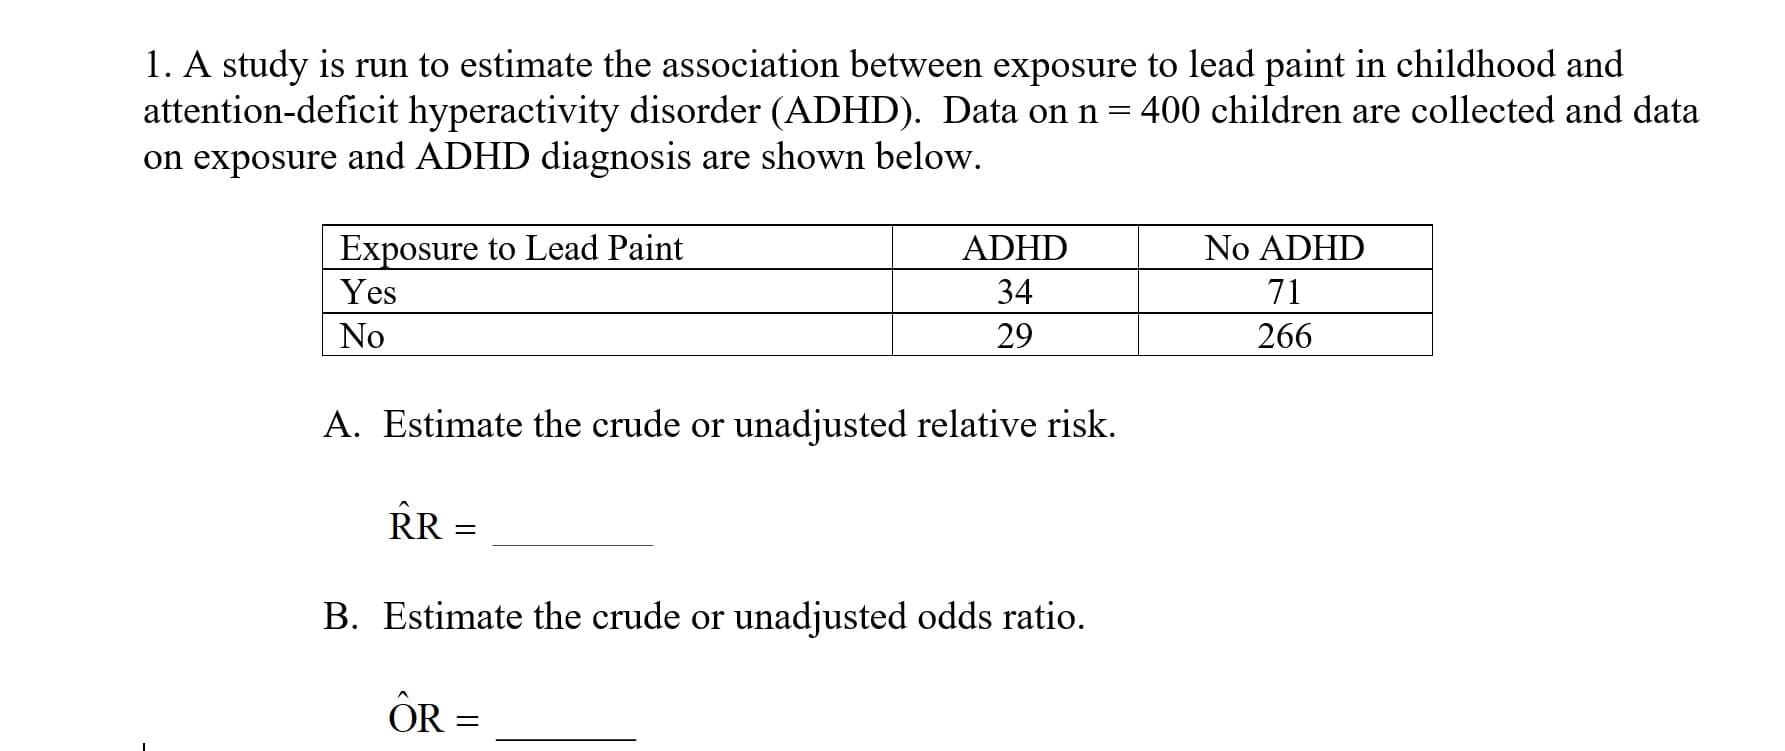 1. A study is run to estimate the association between exposure to lead paint in childhood and
attention-deficit hyperactivity disorder (ADHD). Data on n-400 children are collected and data
on exposure and ADHD diagnosis are shown below
Exposure to Lead Paint
Yes
No
ADHD
34
29
No ADHD
71
266
A. Estimate the crude or unadjusted relative risk.
B. Estimate the crude or unadjusted odds ratio.
